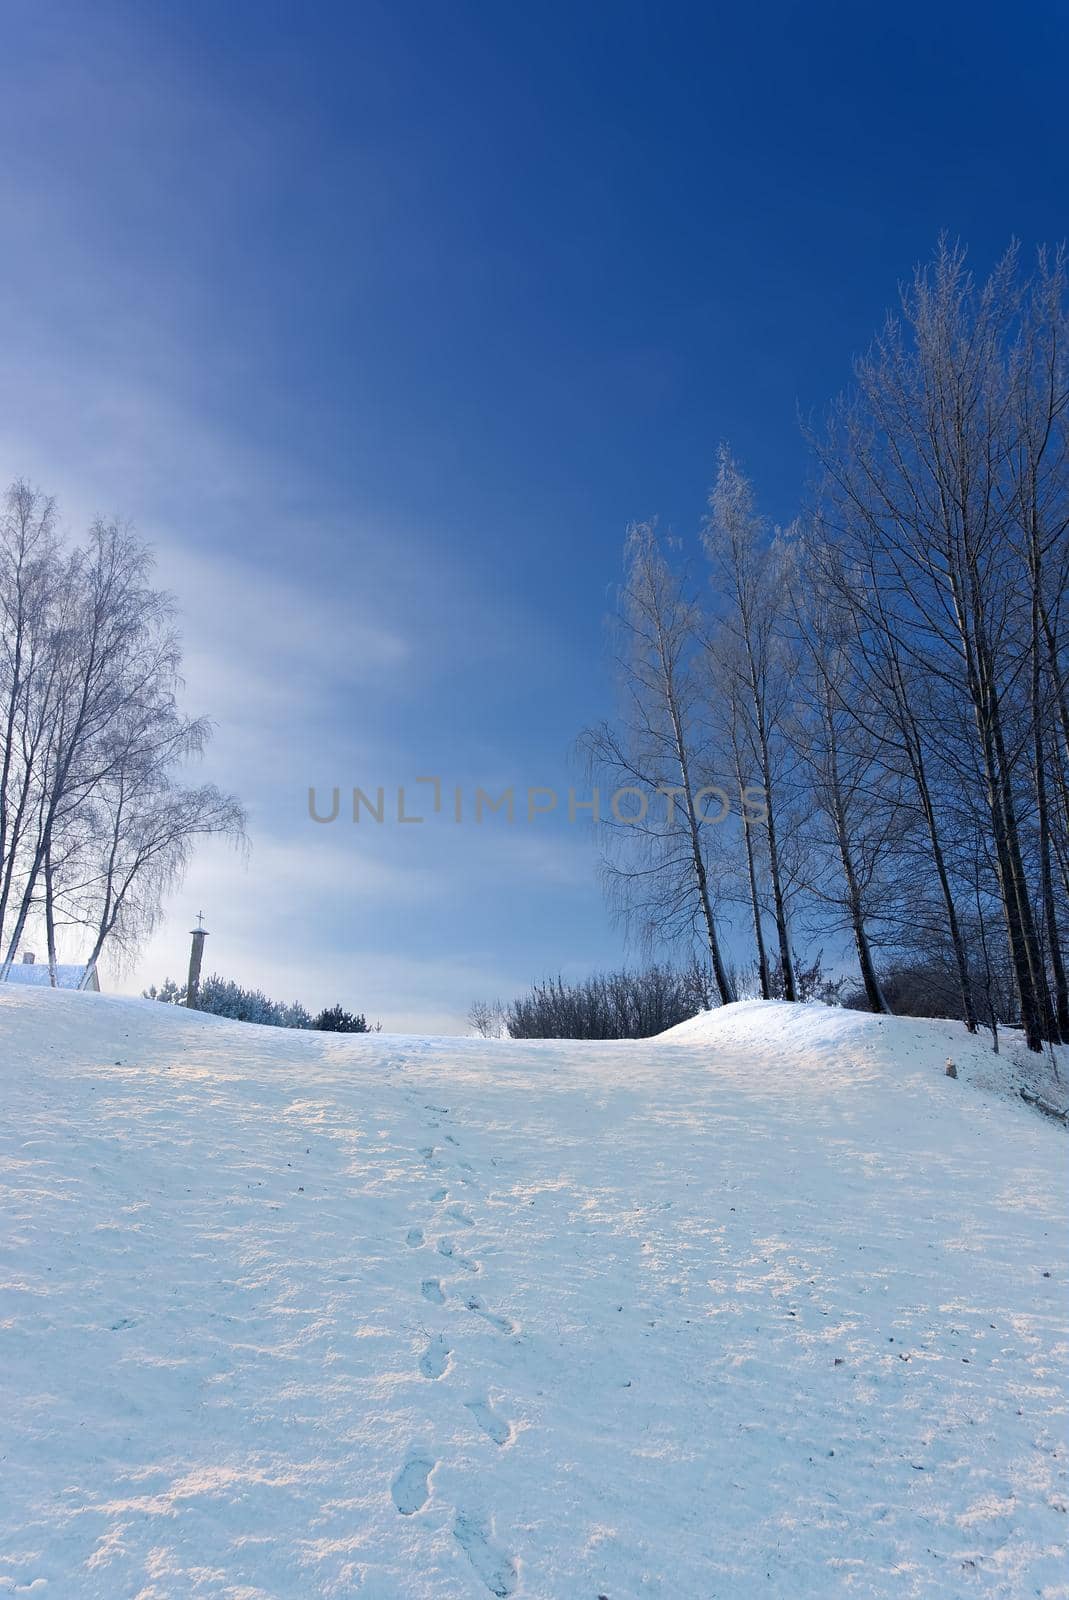 Row of footprints down a mountain slope covered in fresh white snow on a beautiful cold sunny winter day with blue sky looking up from below to trees and the roof of a house on the horizon